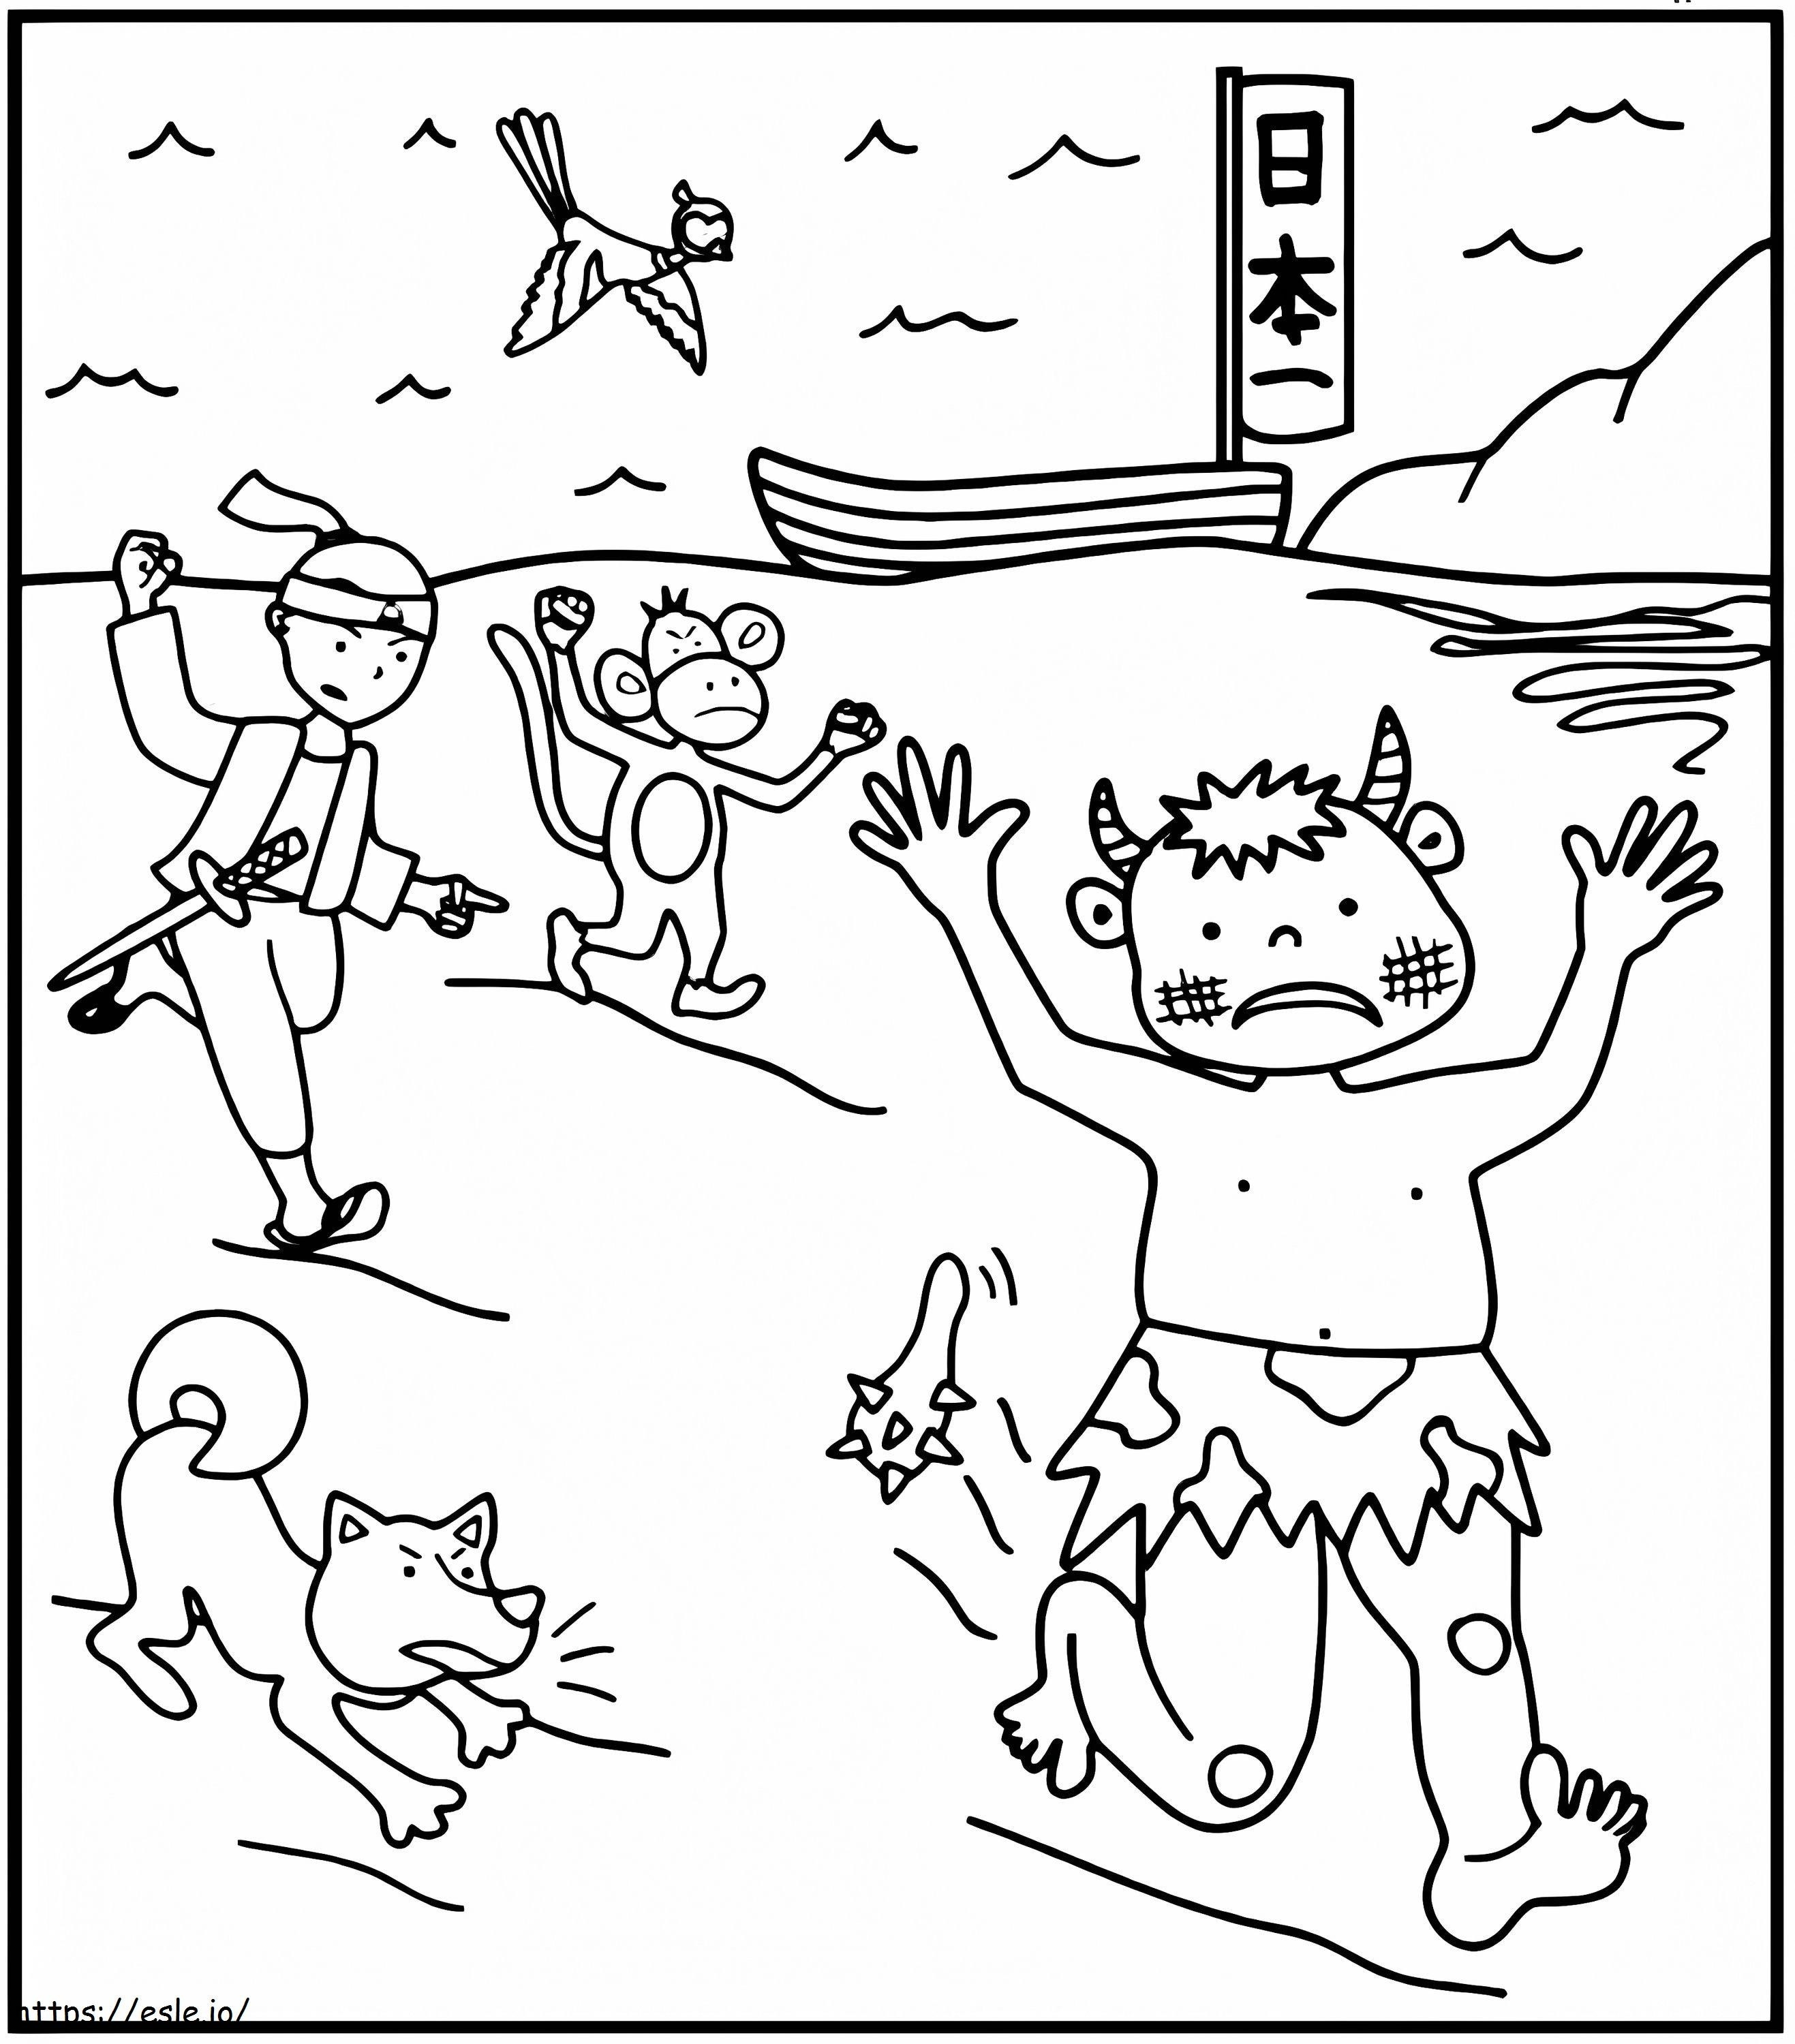 Momotaro Fought The Oni coloring page